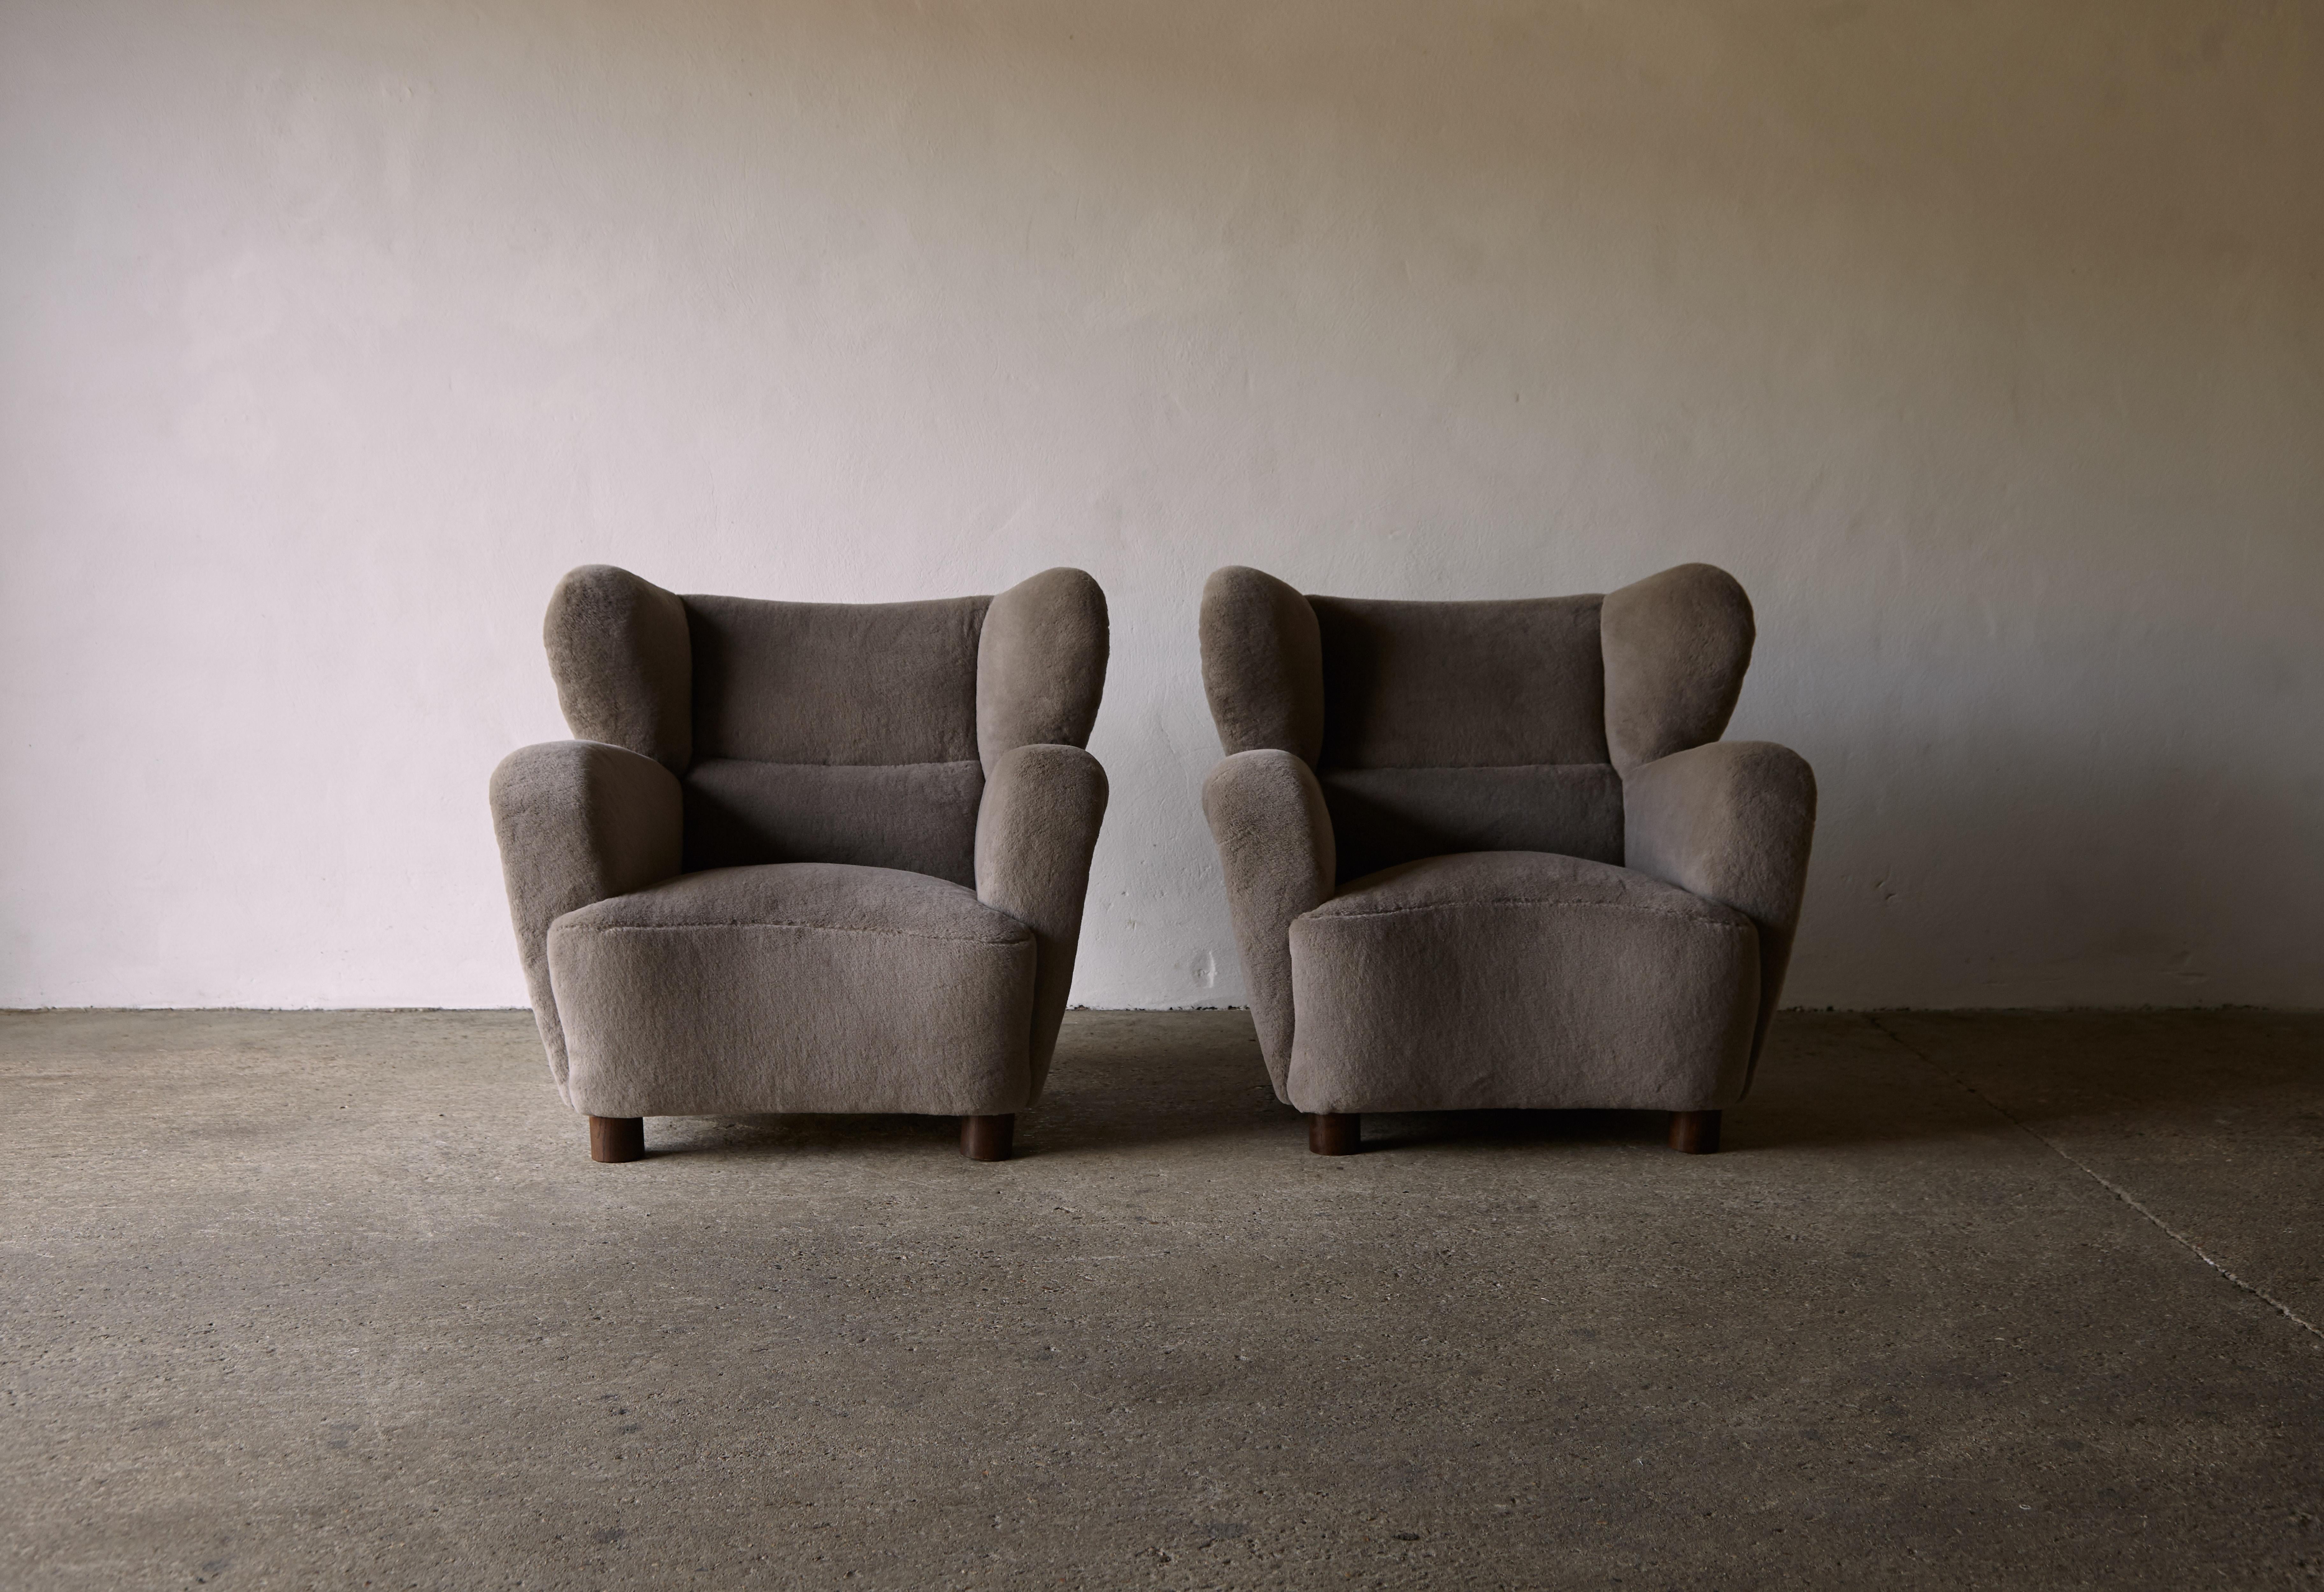 Mid-Century Modern Superb Pair of Armchairs, Newly Upholstered in Pure Alpaca, Denmark, 1940s / 50s